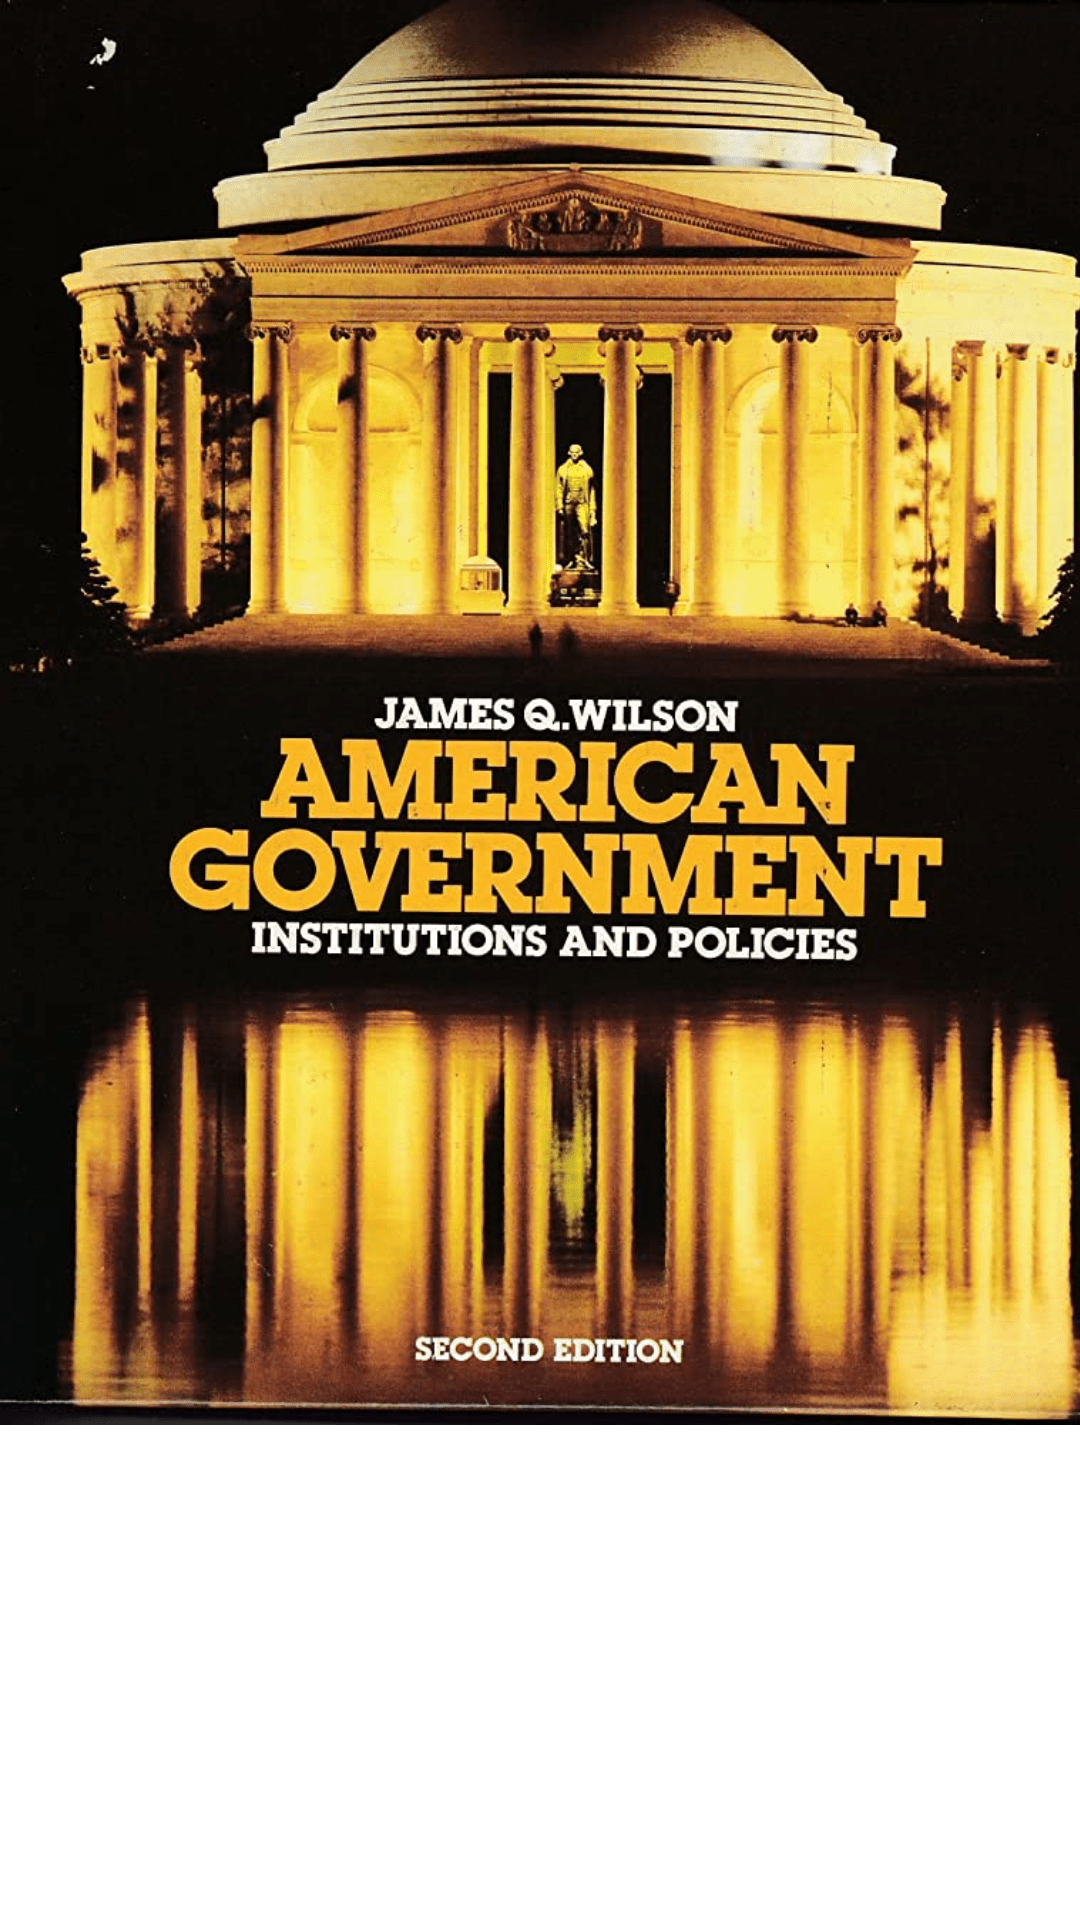 American Government by James Q. Wilson